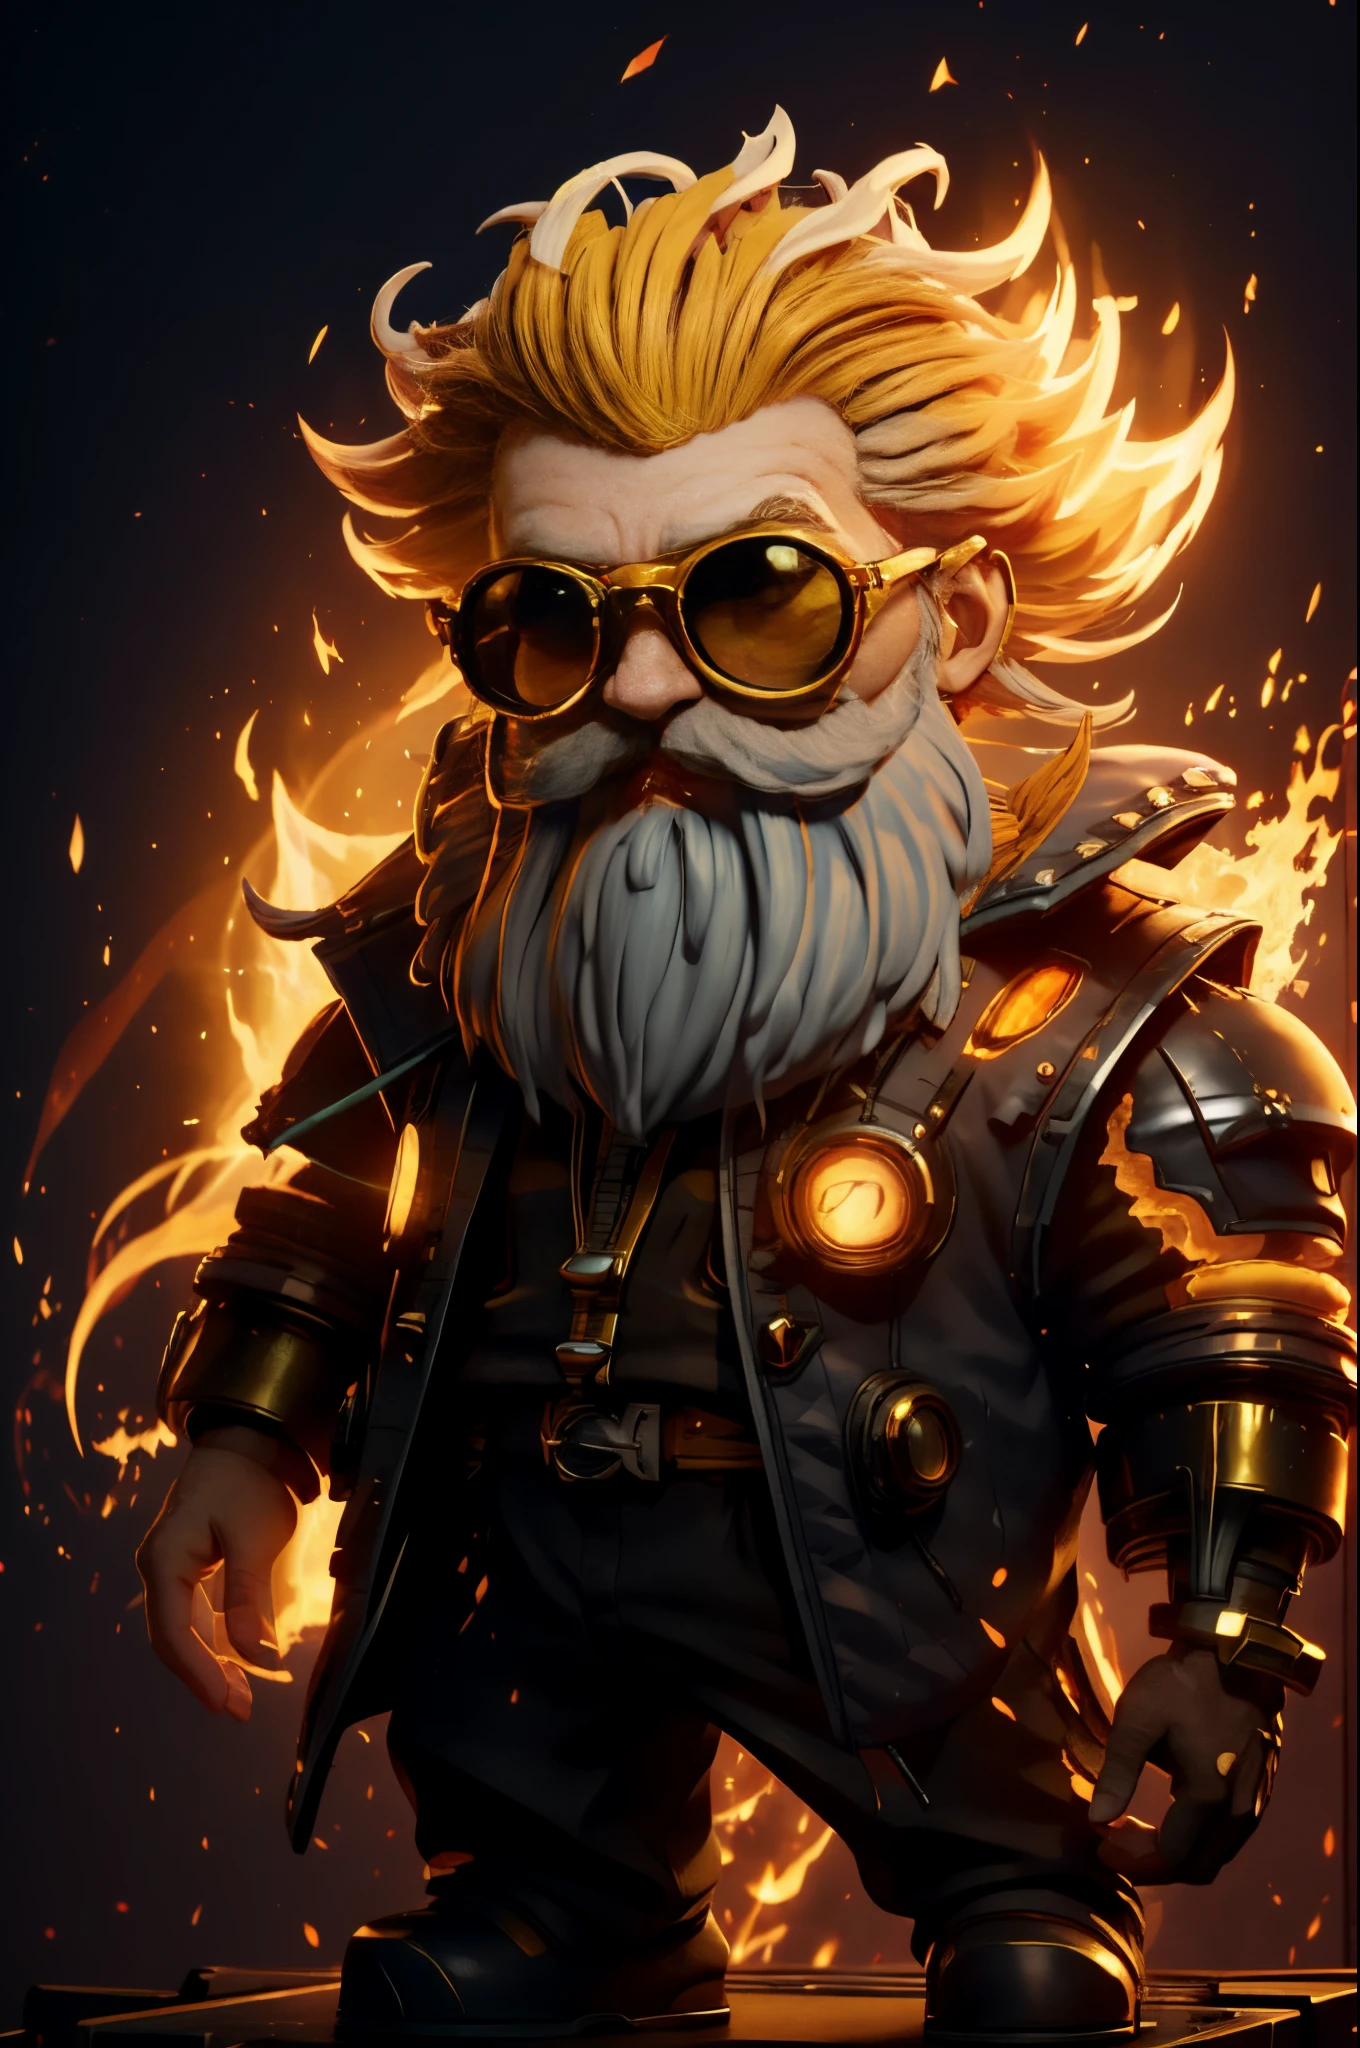 big headed,1 boy, ((white mustache, A yellow-haired one))，catching fire, blasts, grow white beard, fiery hair, Fiery wings, fiery, Incendiary weapons, glowing, malefocus, Molten rock, Grow a beard，Hot, single mechanical arm, Alone, spark of light, sun glasses, the sunset, tail-tip fire, torchan, Upper part of the body，chibiStyle,tmasterpiece,Best quality,offcial art,extremely detaild的 CG unified 8k wallpapers,Mystery style,Chibi